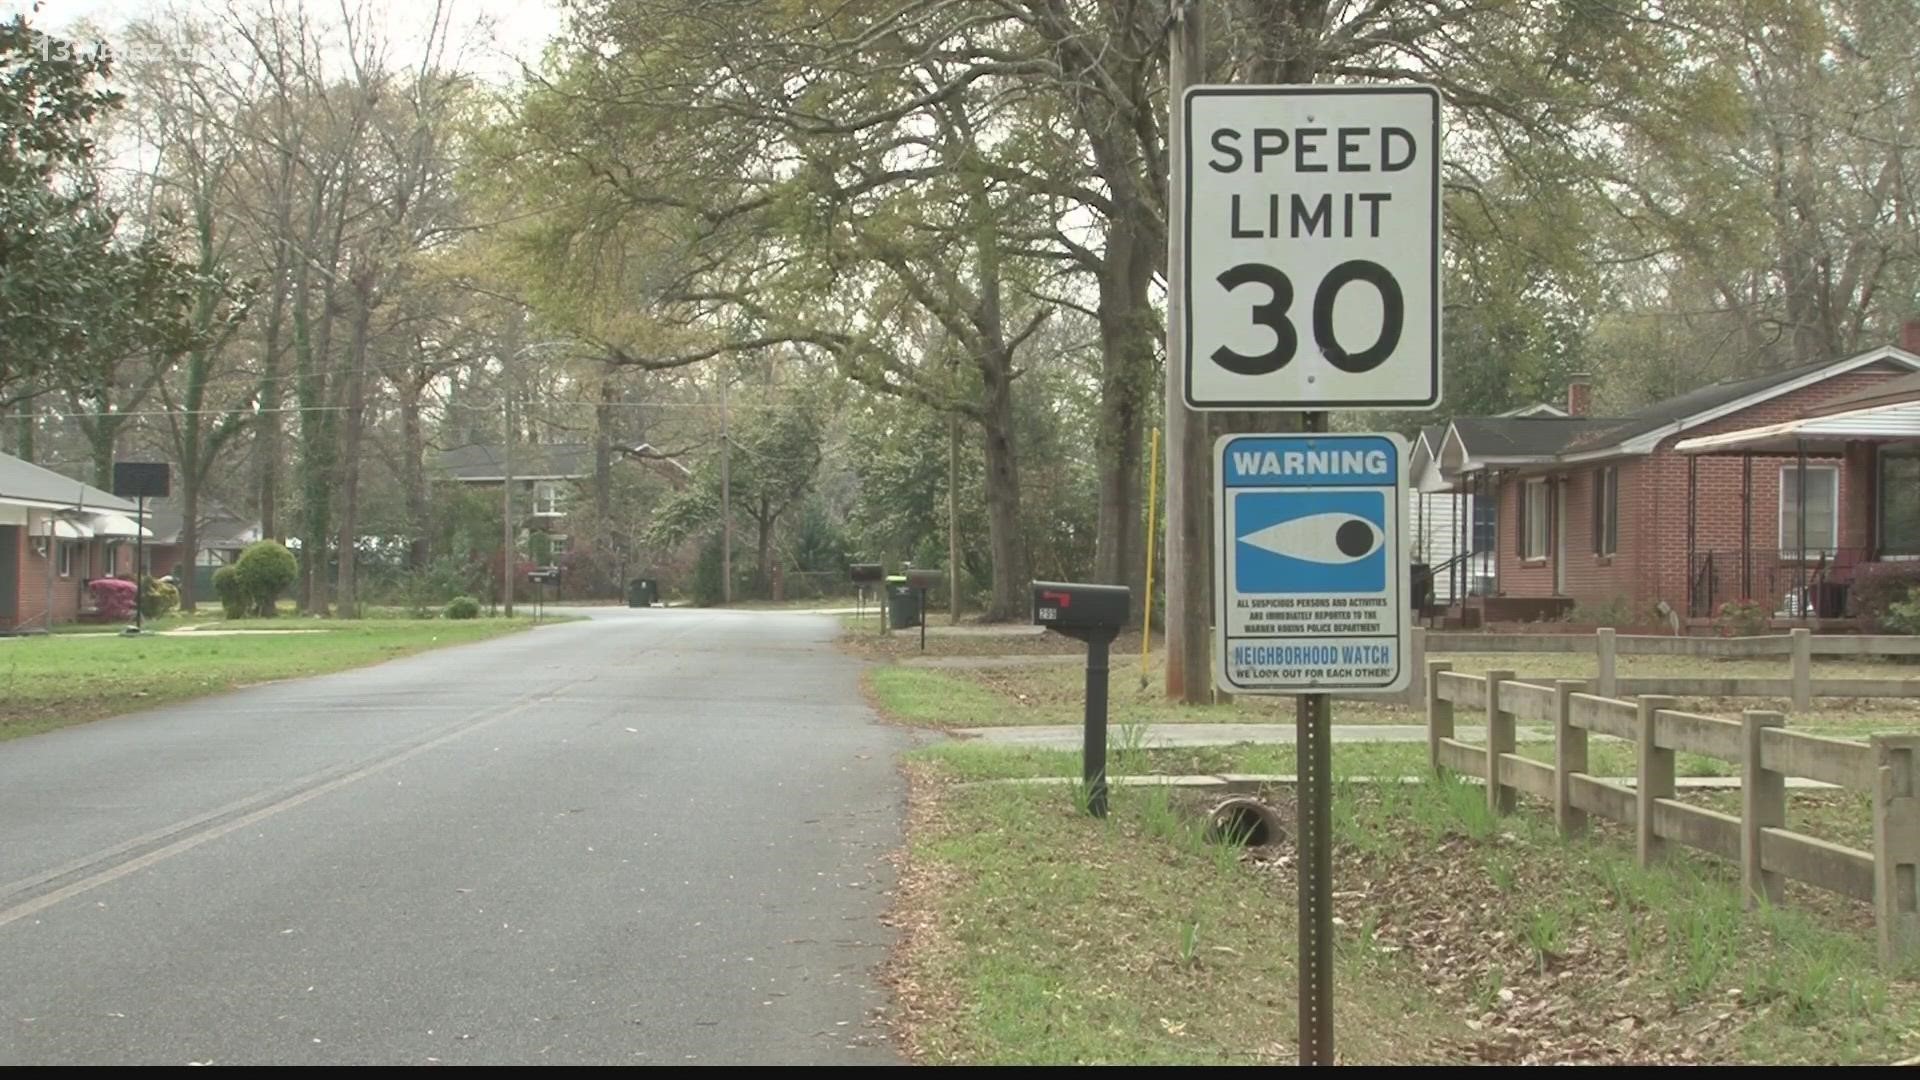 Warner Robins has at least 15 active neighborhood watch groups, but they'd like to see more.